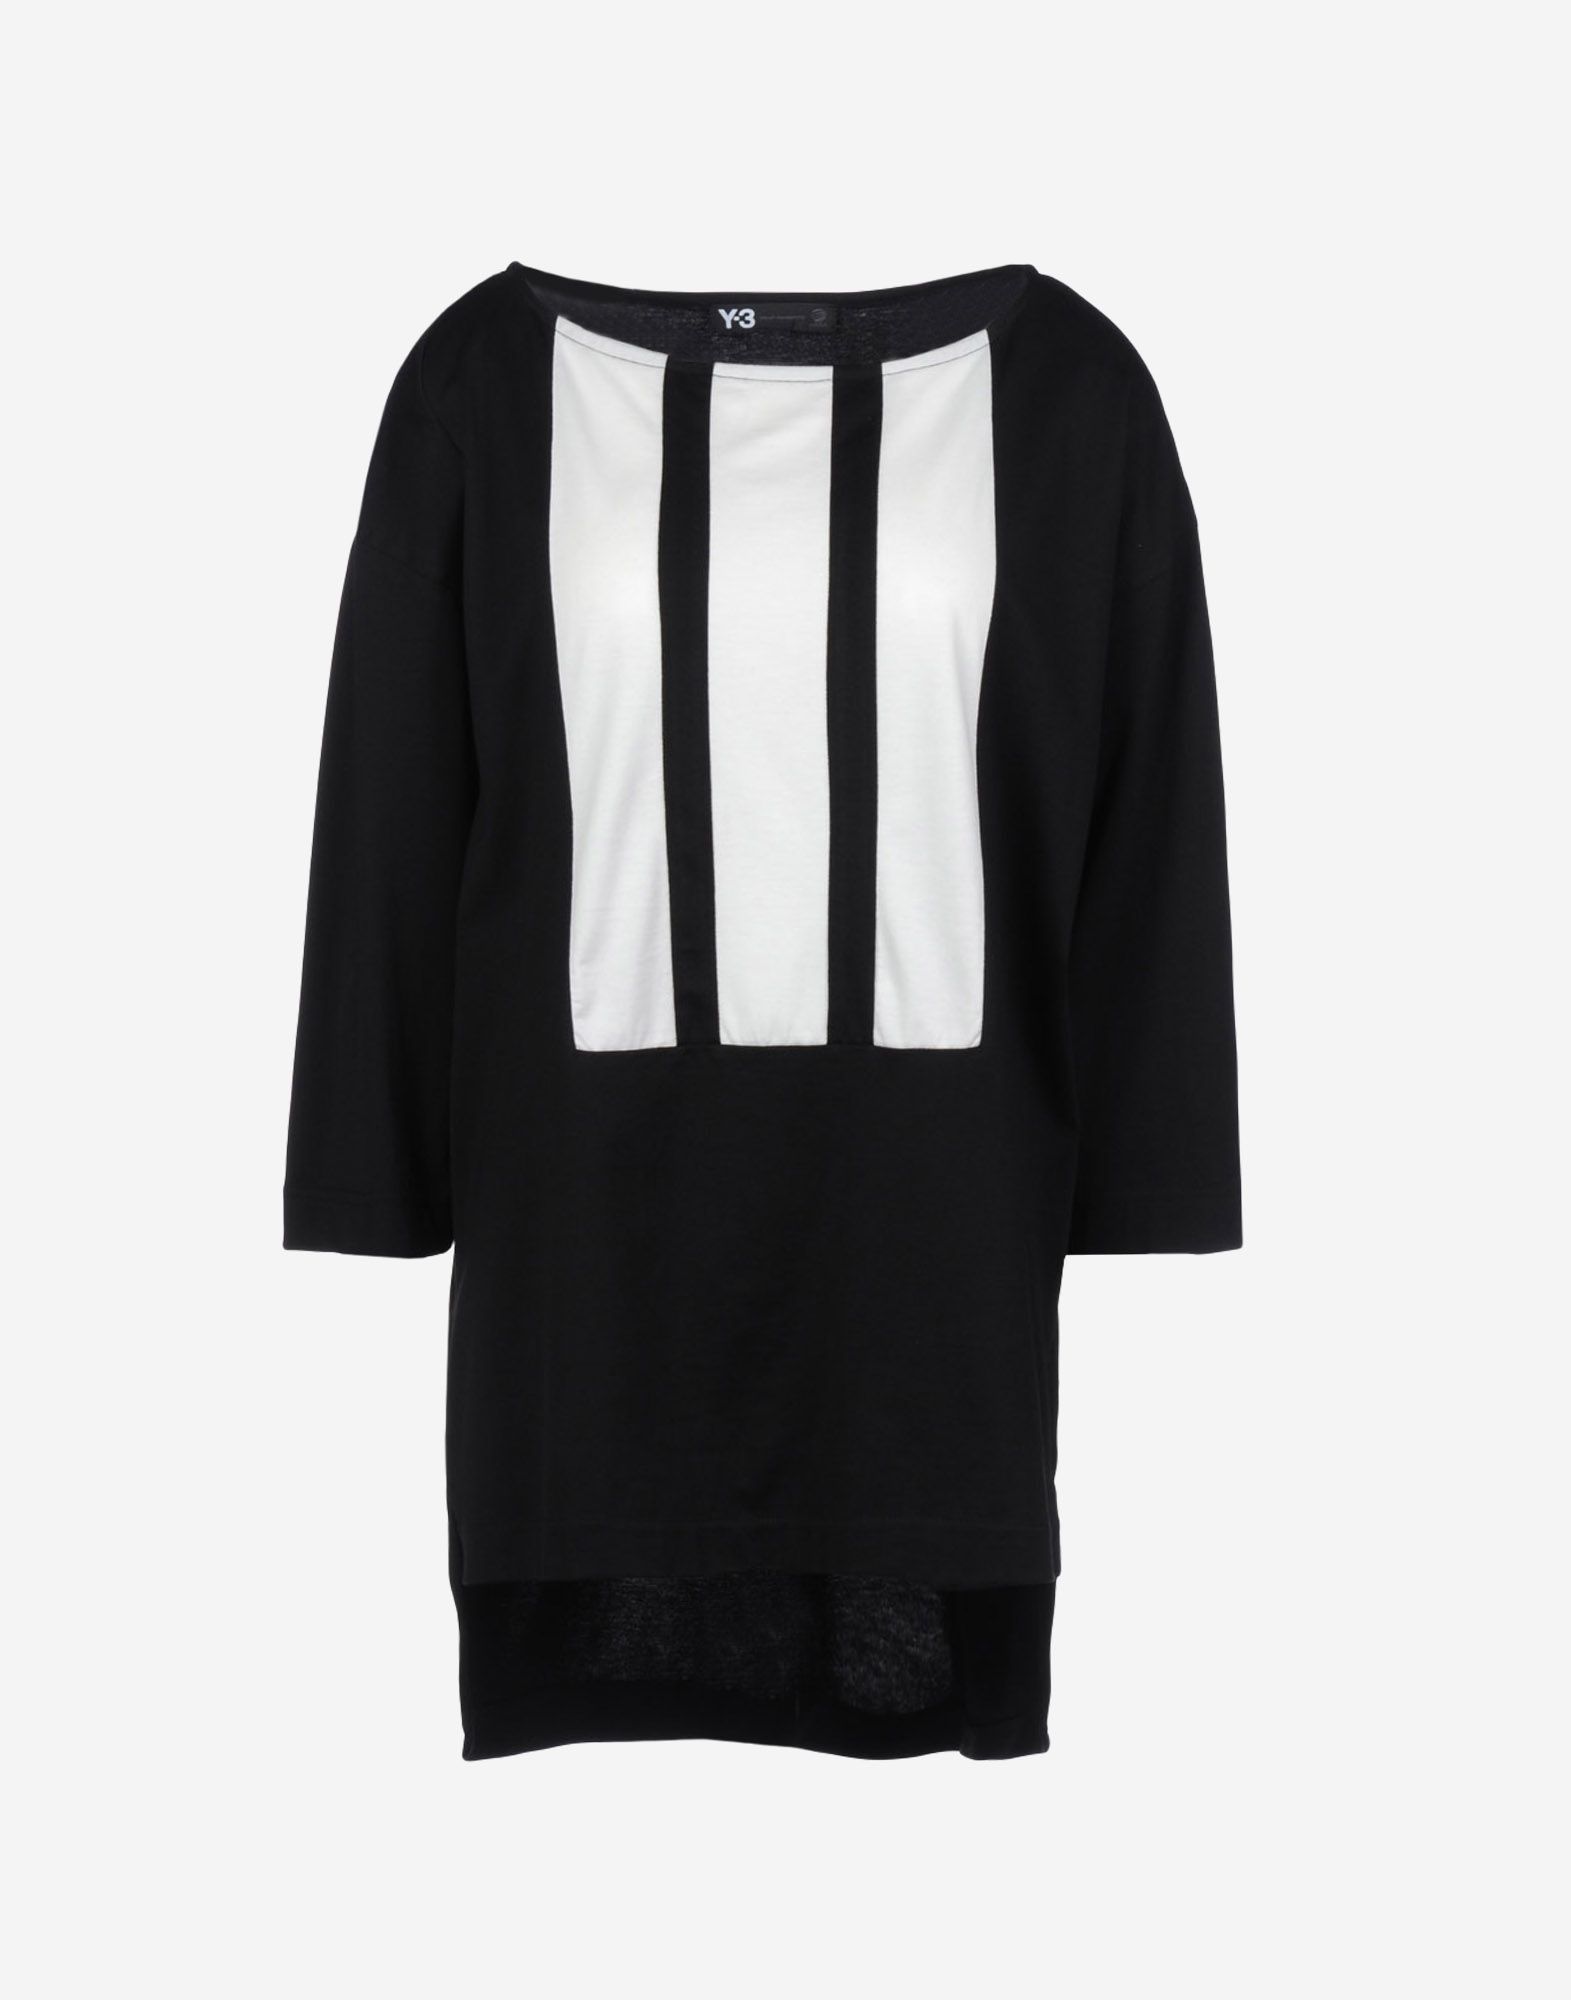 Y 3 Graphic Top for Women | Adidas Y-3 Official Store